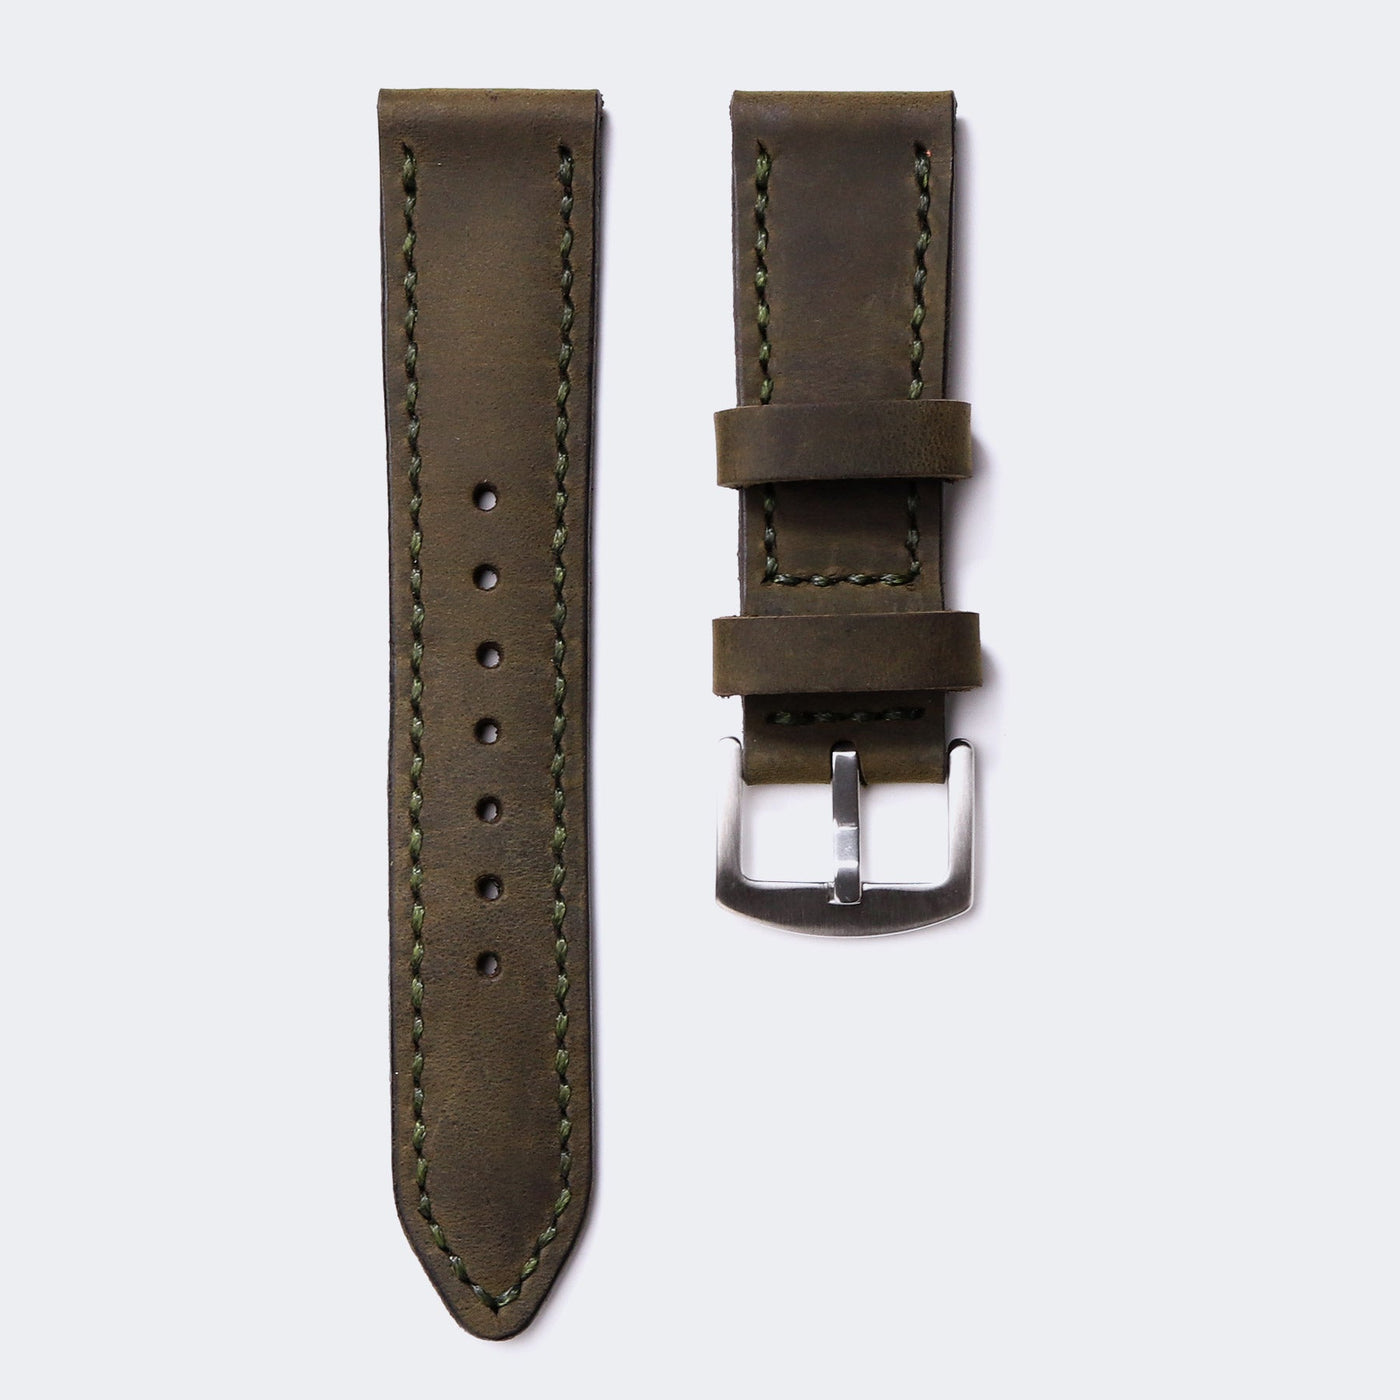 Custom Made Leather Watch Strap - Olive Green